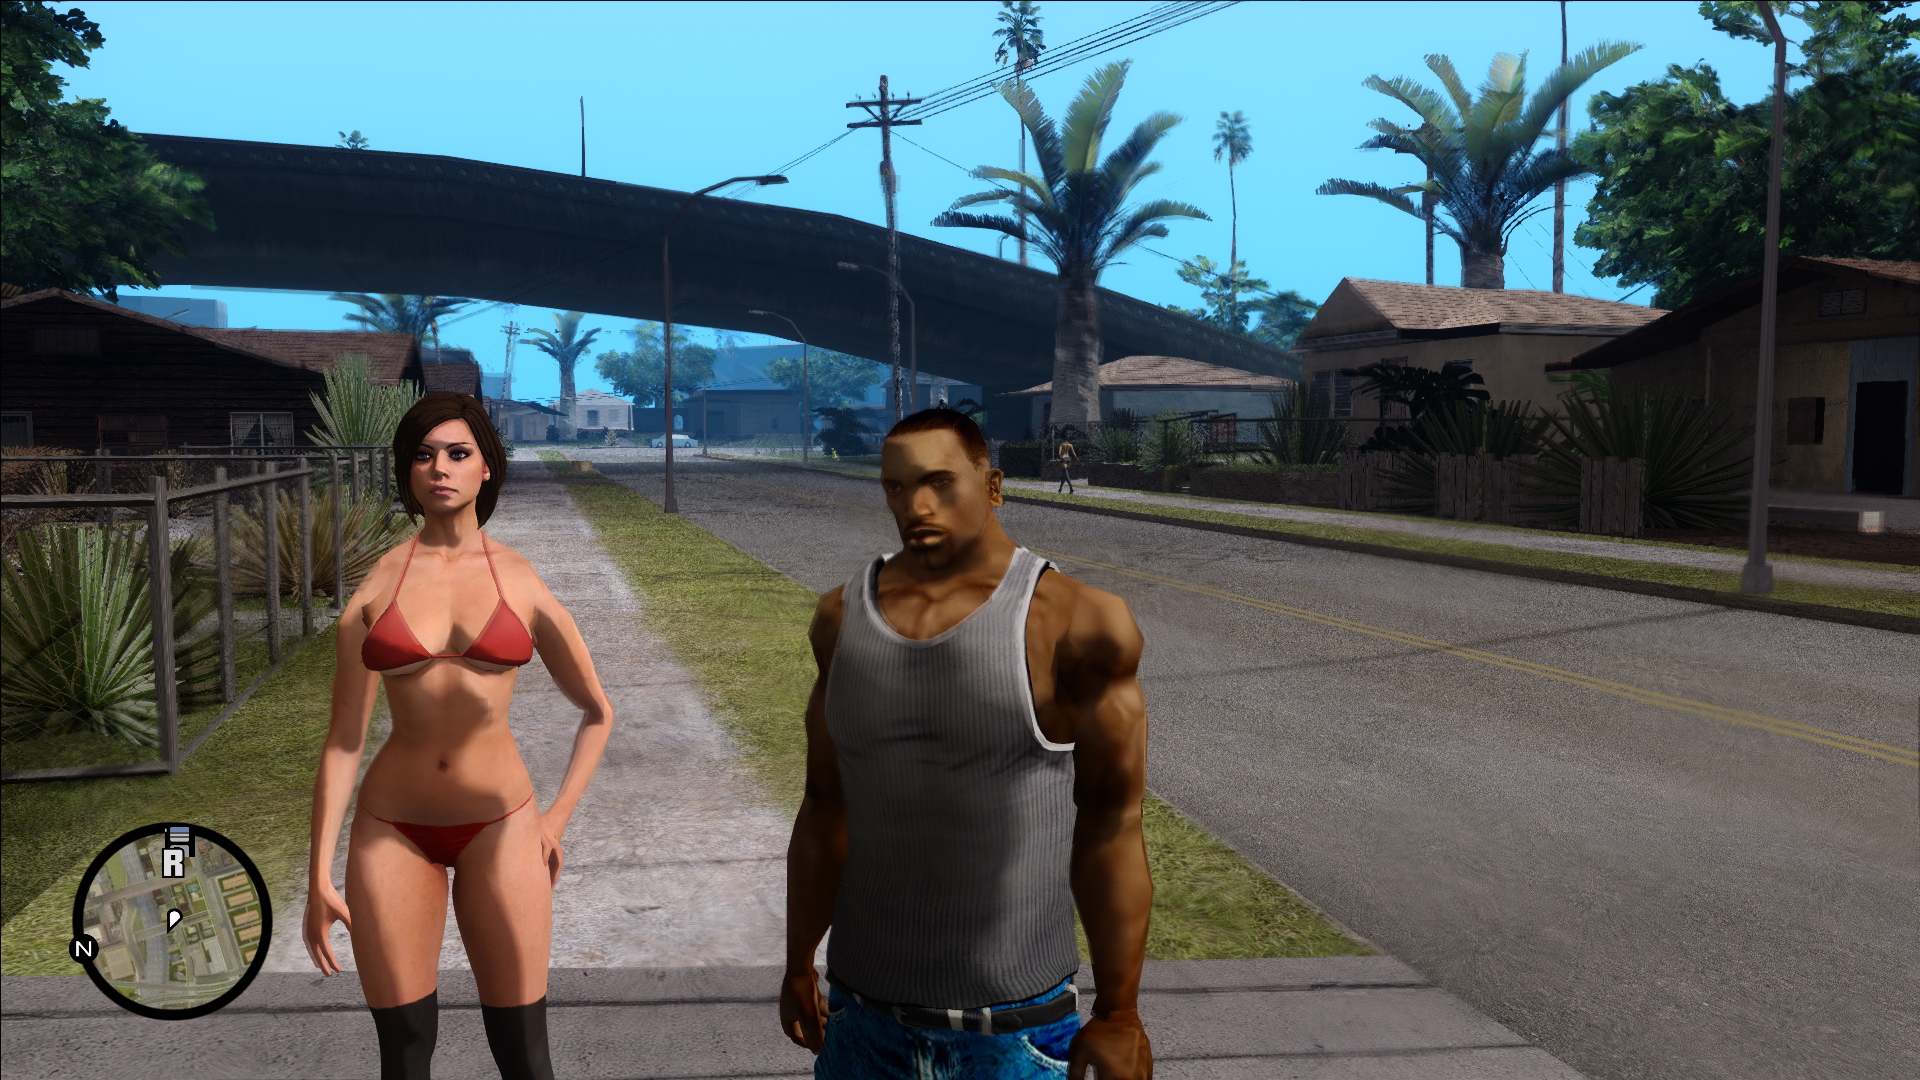 step-by-step instructions for modding the 7th Grand Theft Auto game. 